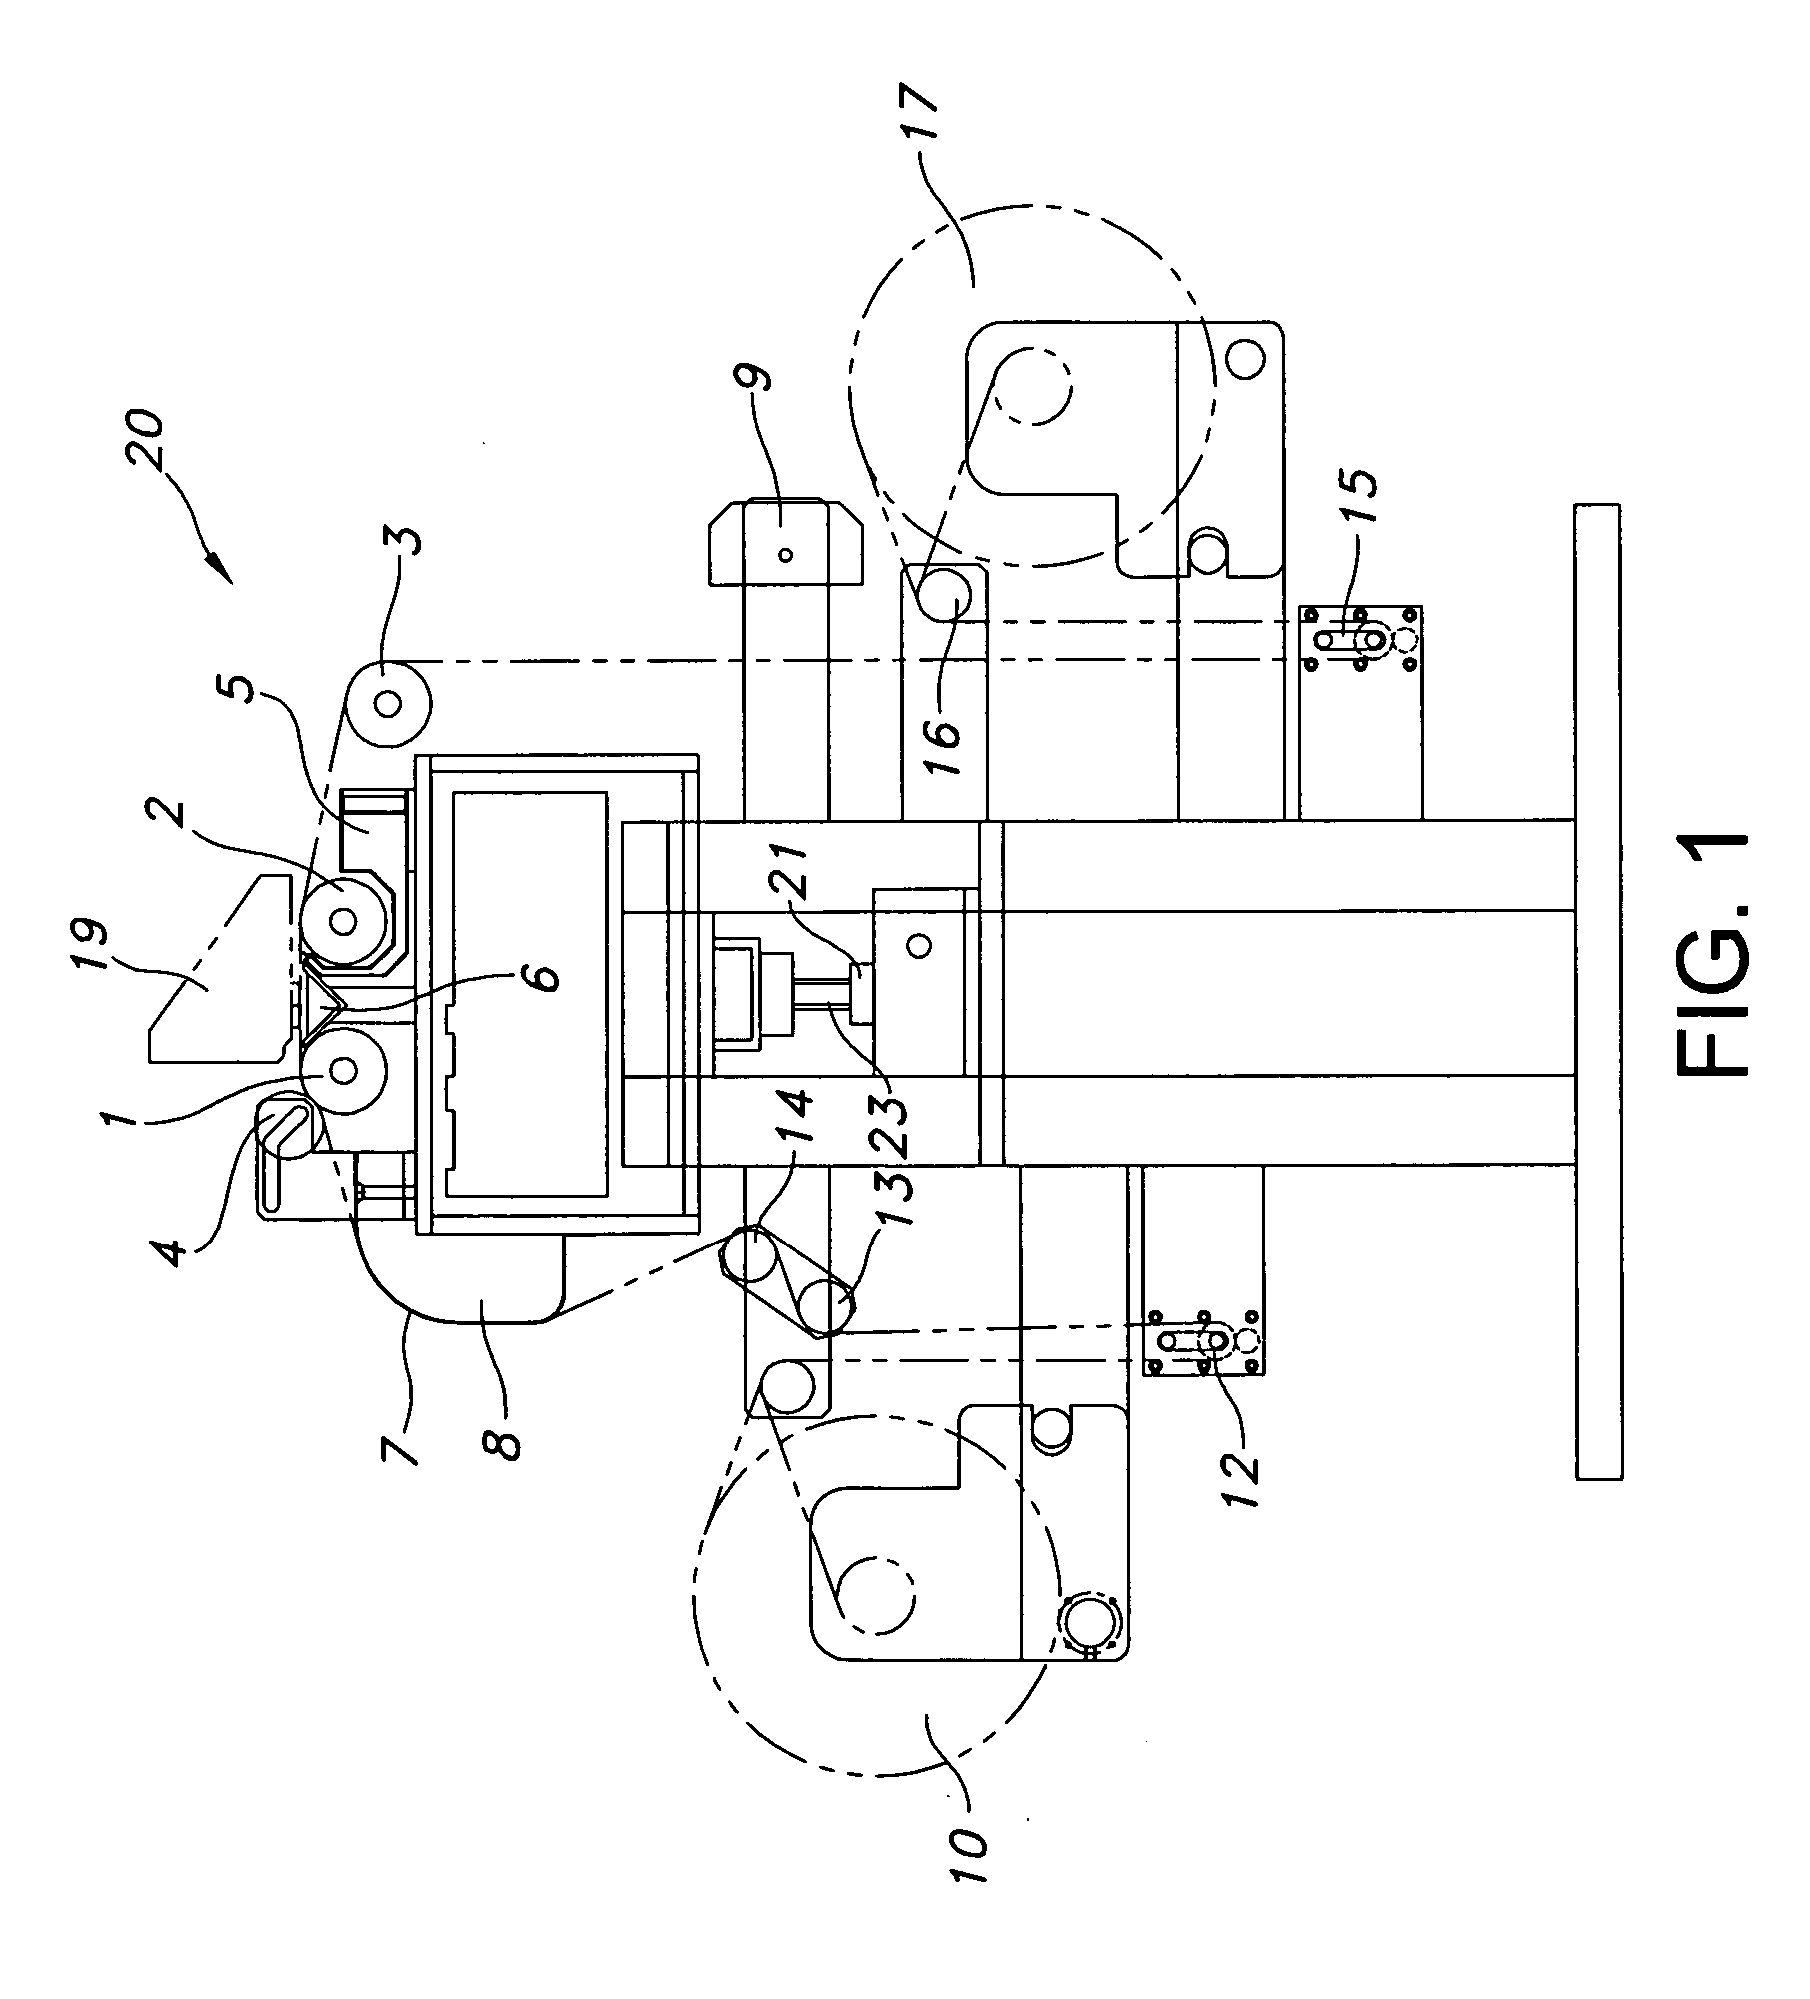 Height adjustment system for image forming machine